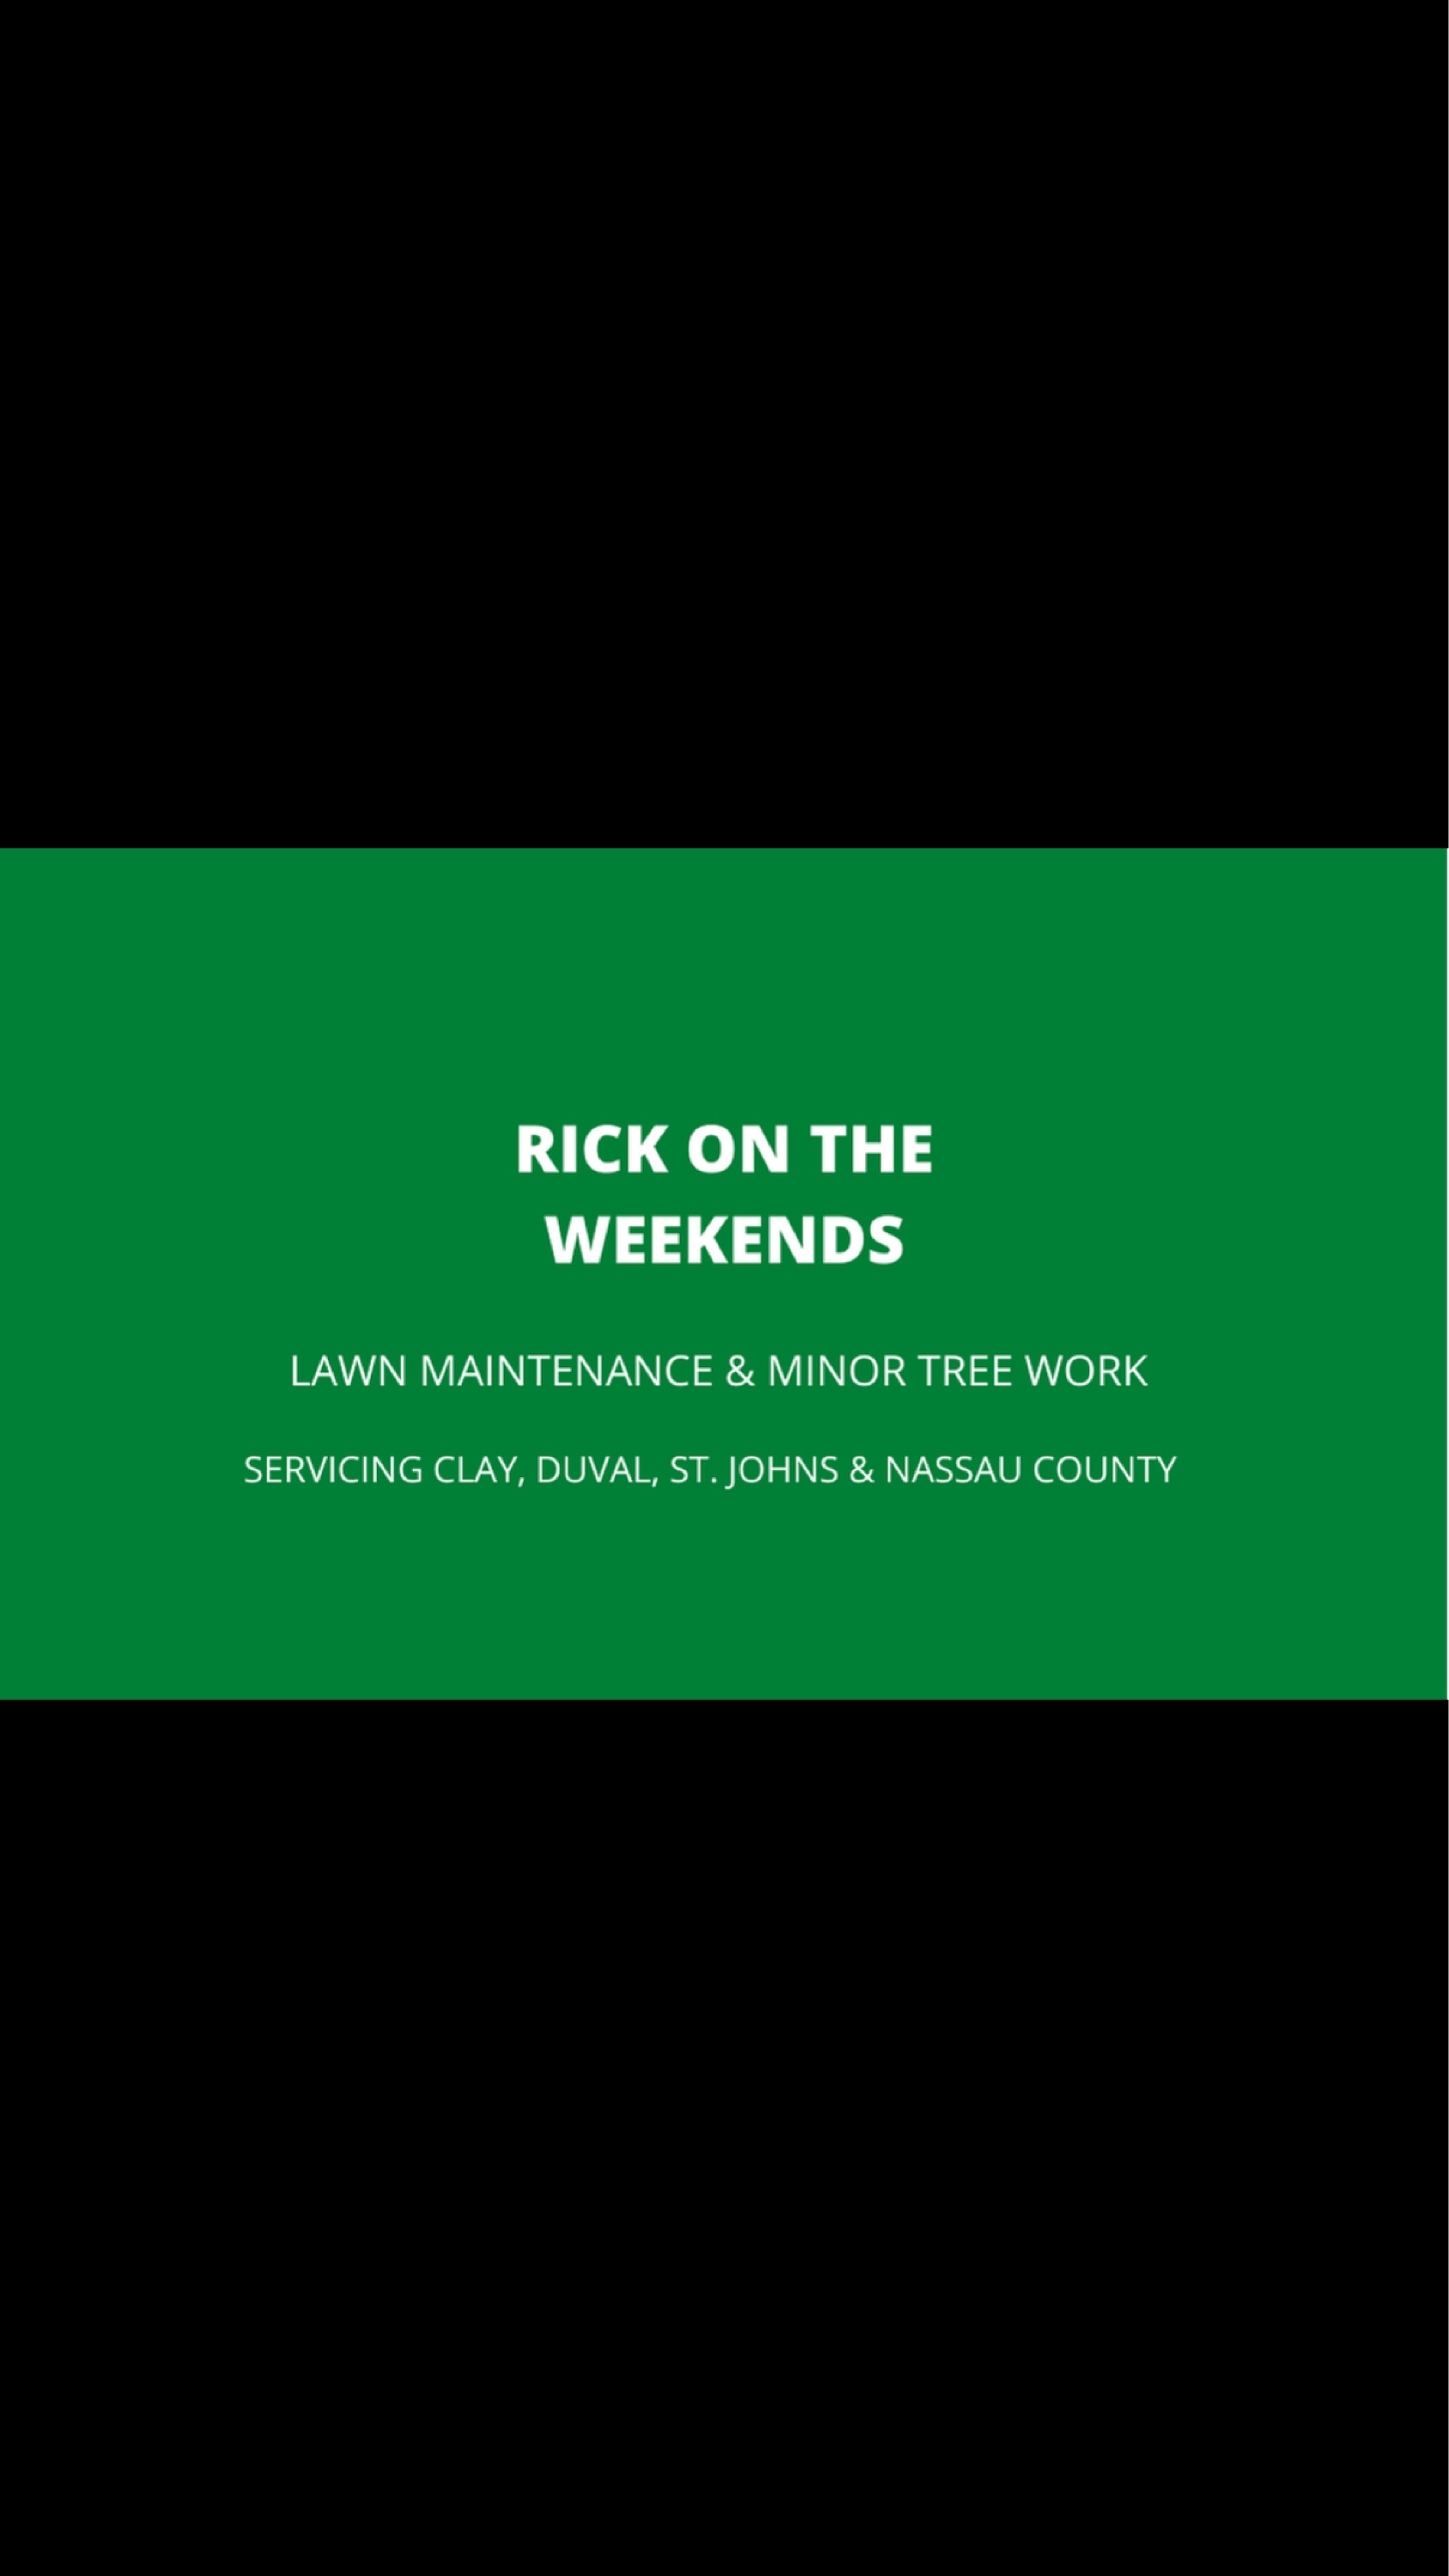 Rick on the Weekends Logo